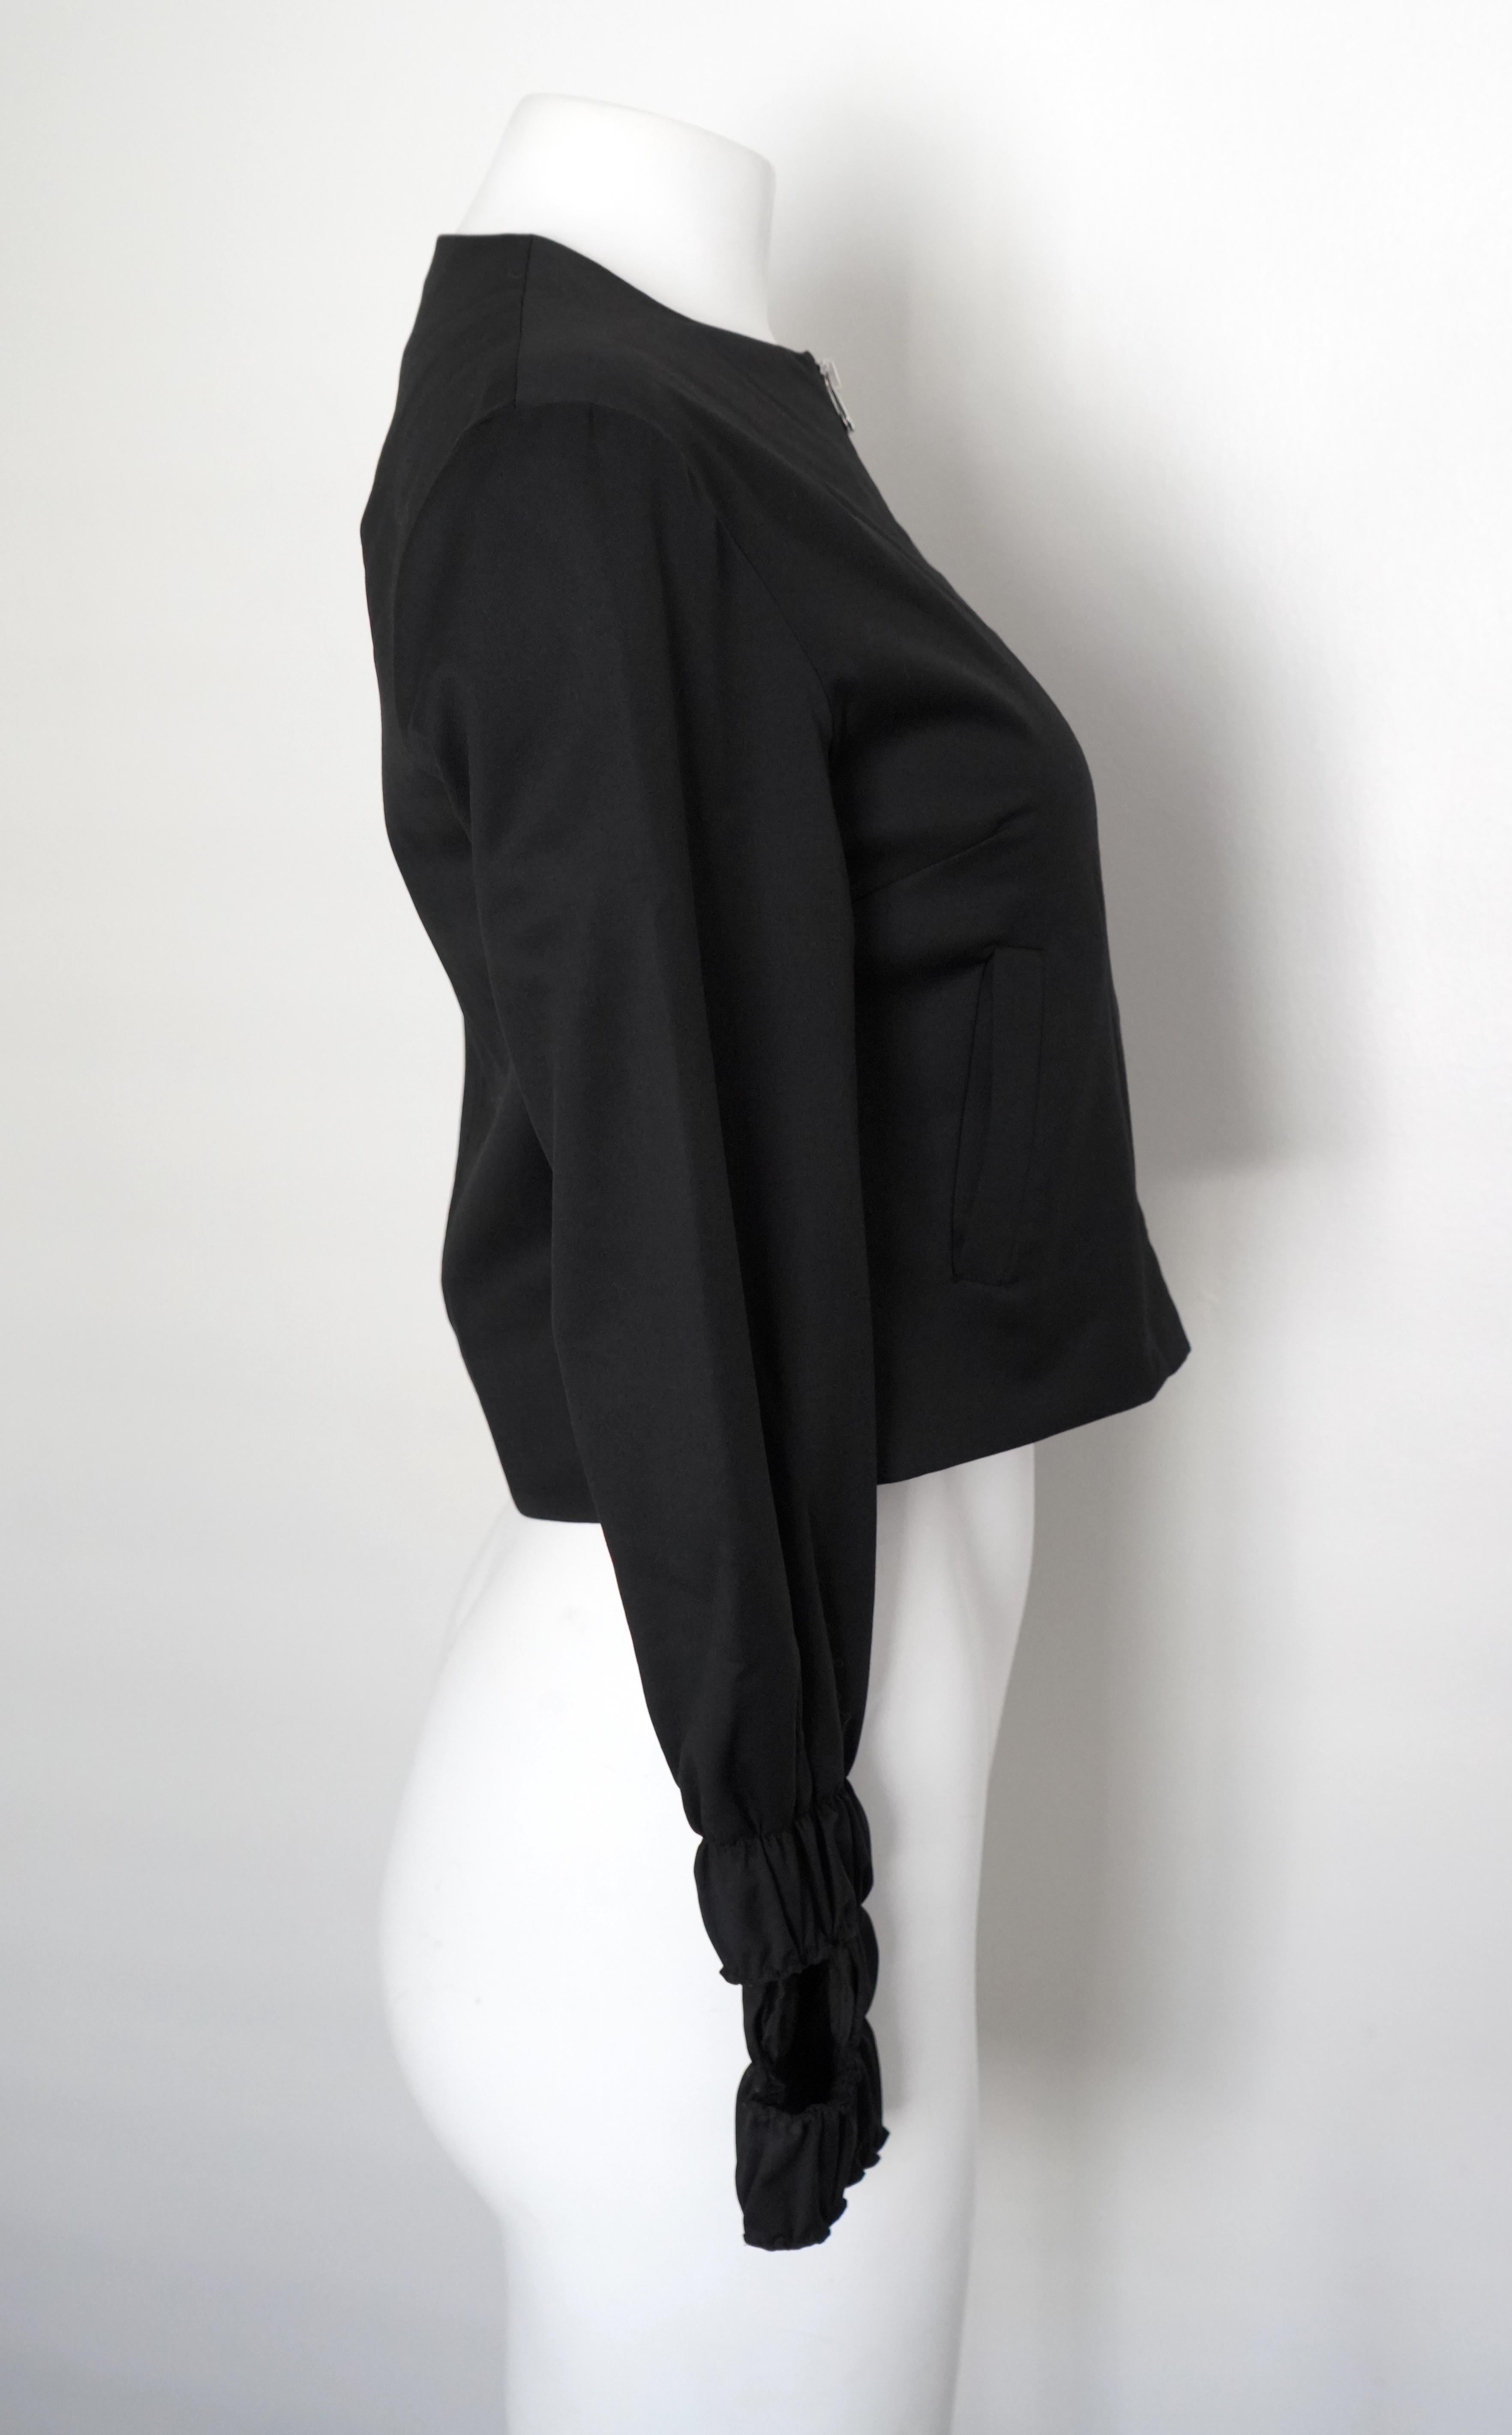 This J. W. Anderson Black Wool Cropped Zip Bolero Jacket in size X-small (UK 6, US 2, Eur 34) combines fashion-forward design with functional elements. With a cropped fit, the jacket showcases pleated sleeves at the wrist, featuring thumb holes for